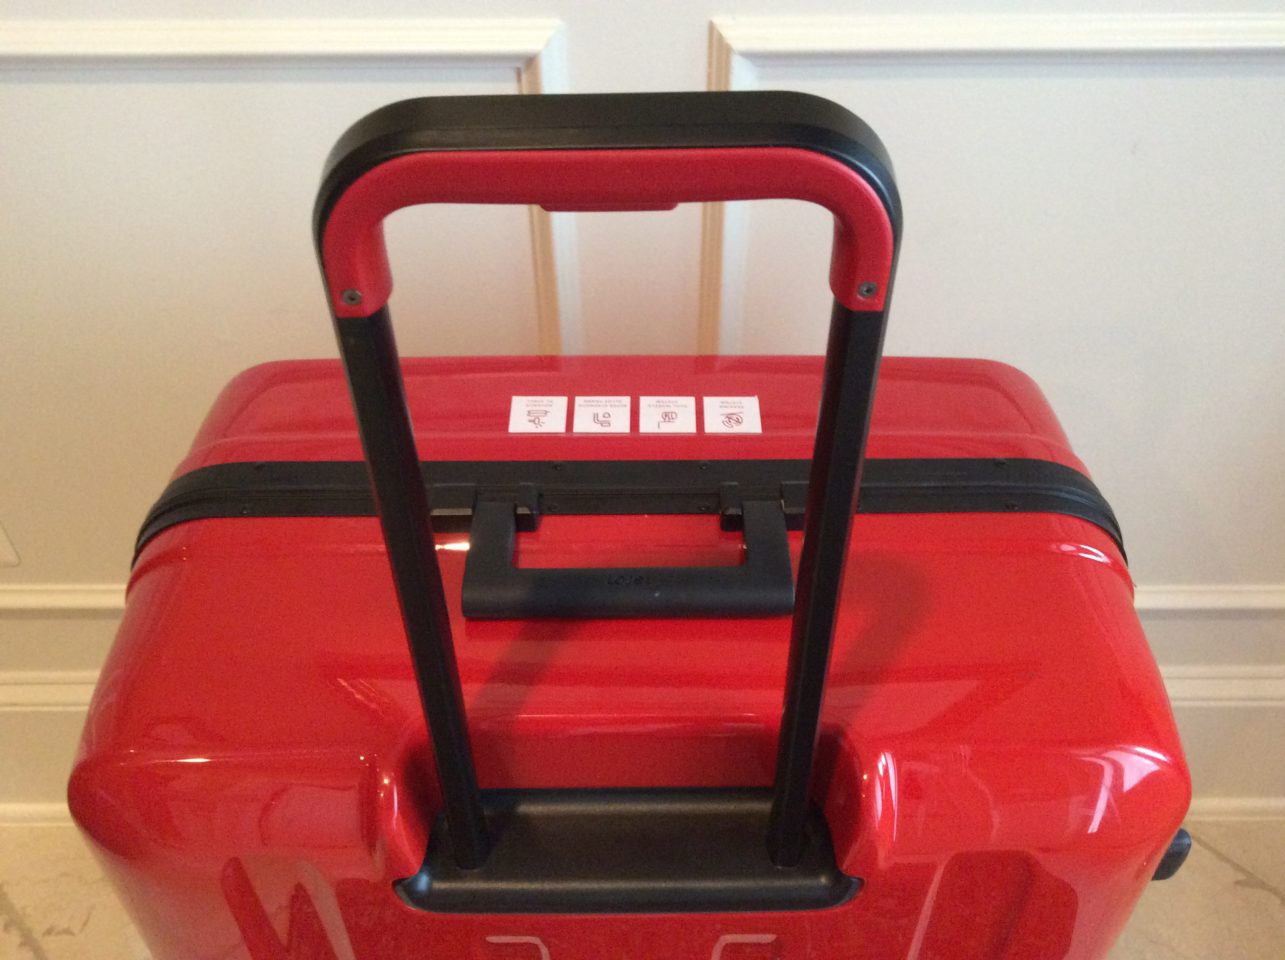 Lojel Luggage ~ Sturdy telescoping handle and one-piece trolley system